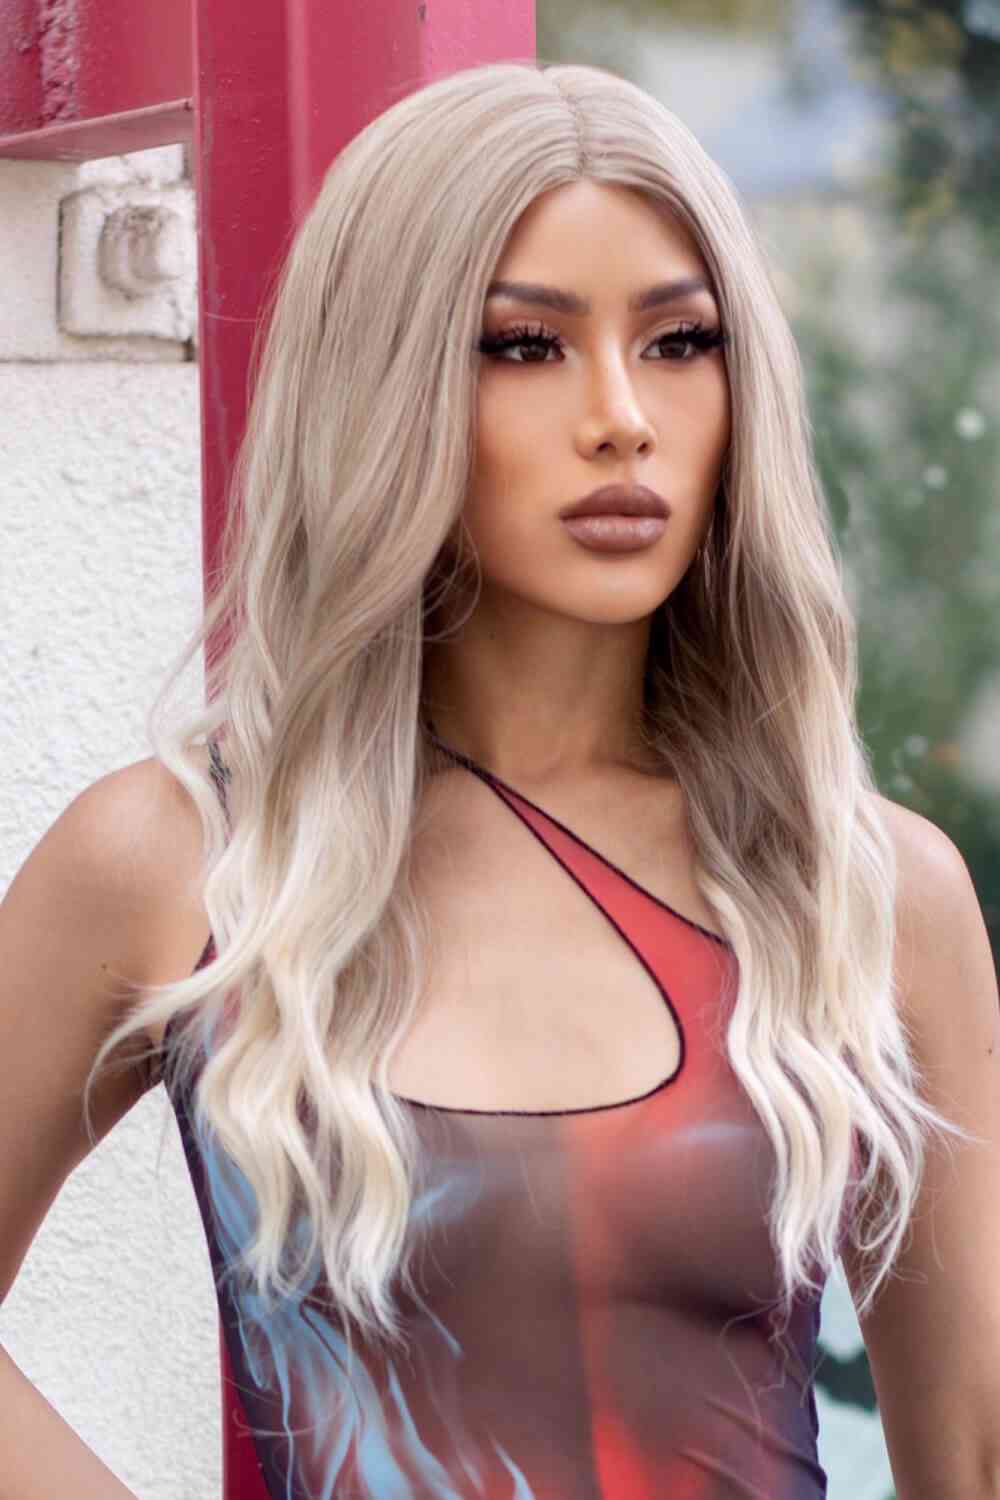 13*2" Lace Front Wigs Synthetic Long Wave 24" 150% Density in Medium Blonde Highlights   